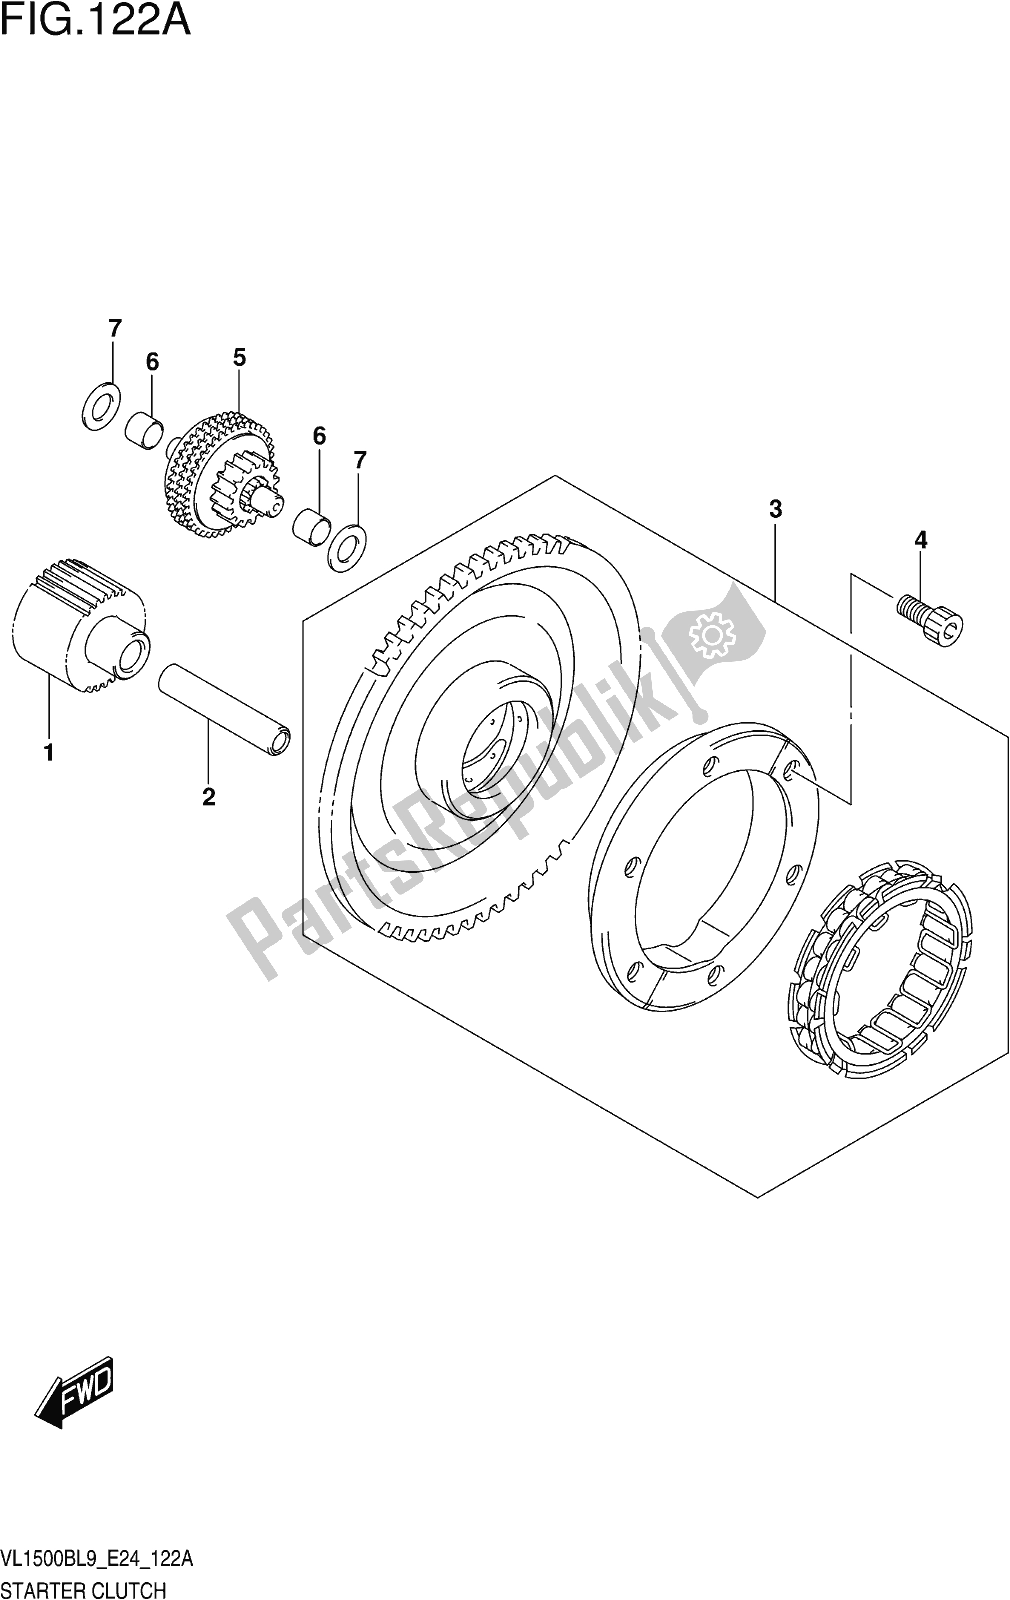 All parts for the Fig. 122a Starter Clutch of the Suzuki VL 1500B 2019